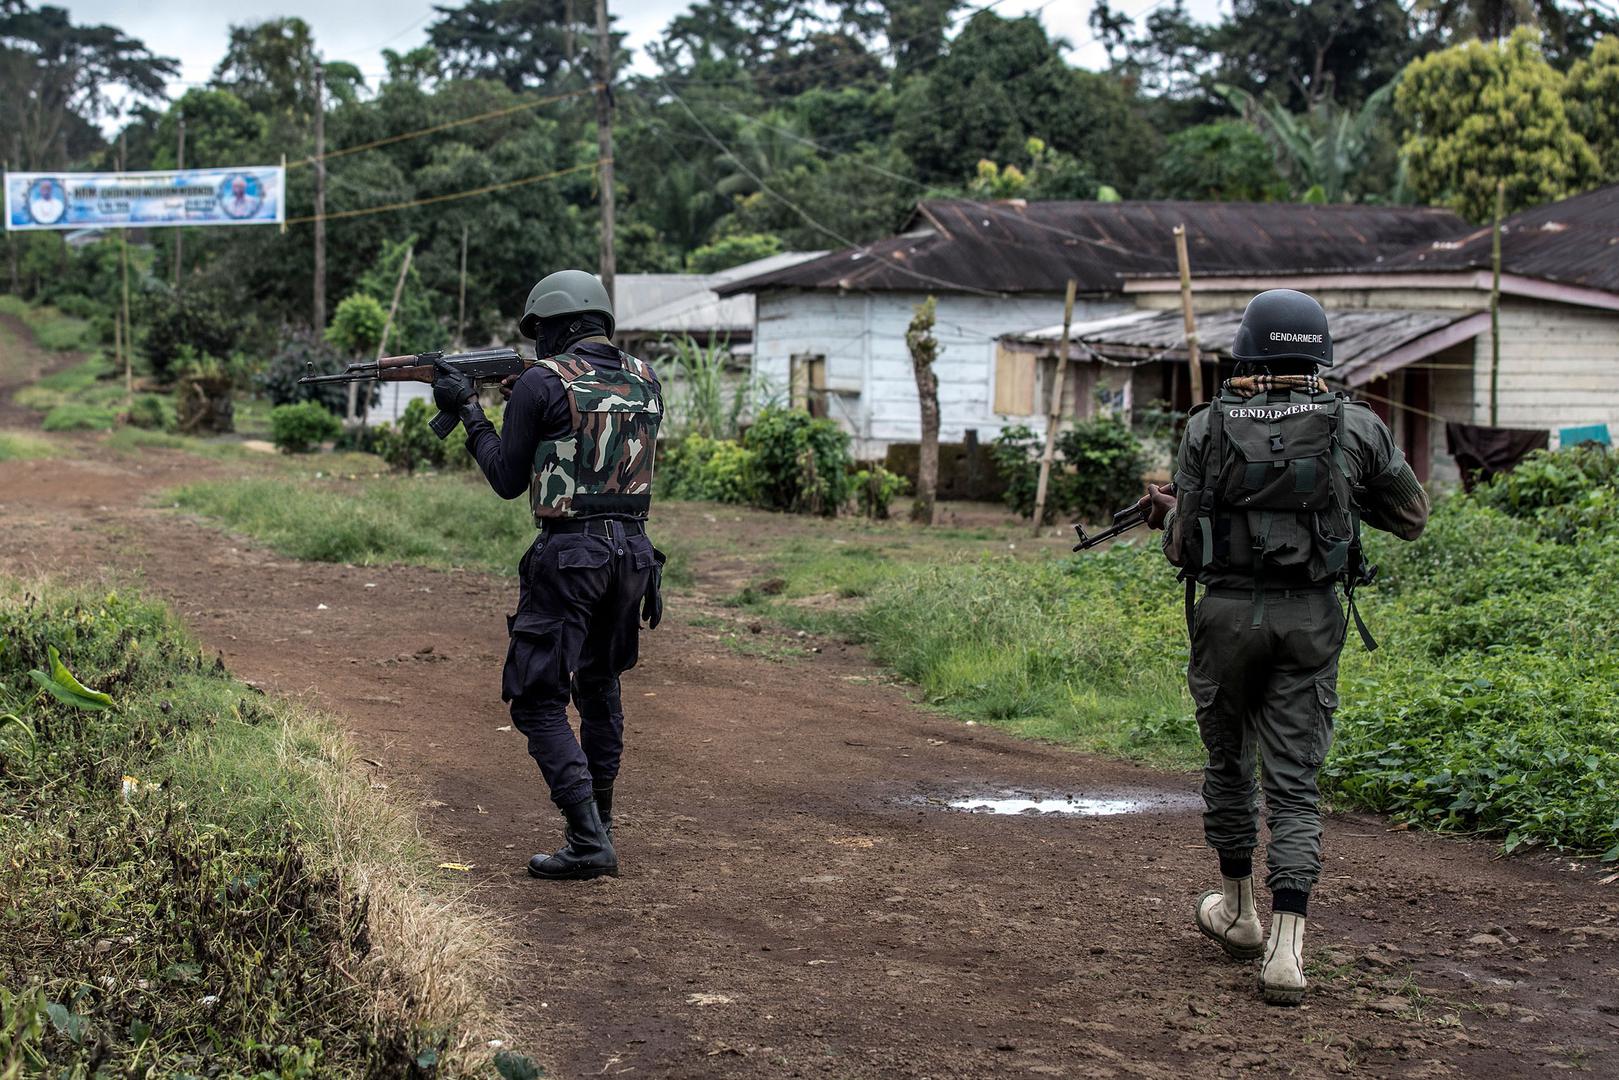 Security forces patrolling Muyuka, a town in the South West Region of Cameroon, the US calls both sides to the conflict in the NW and SW to abjure further violence and open dialogue without pre-conditions